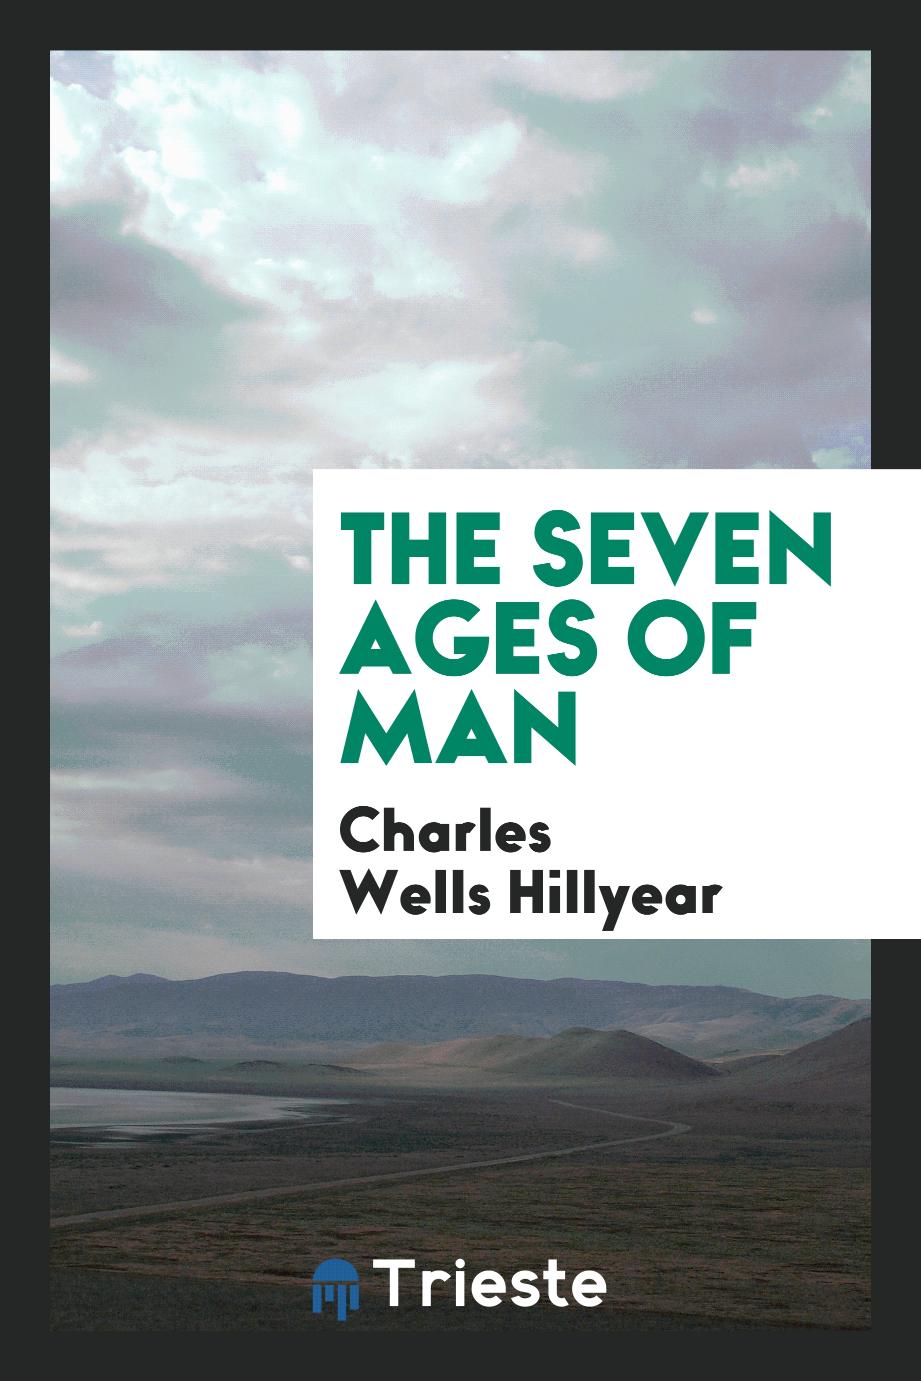 The seven ages of man